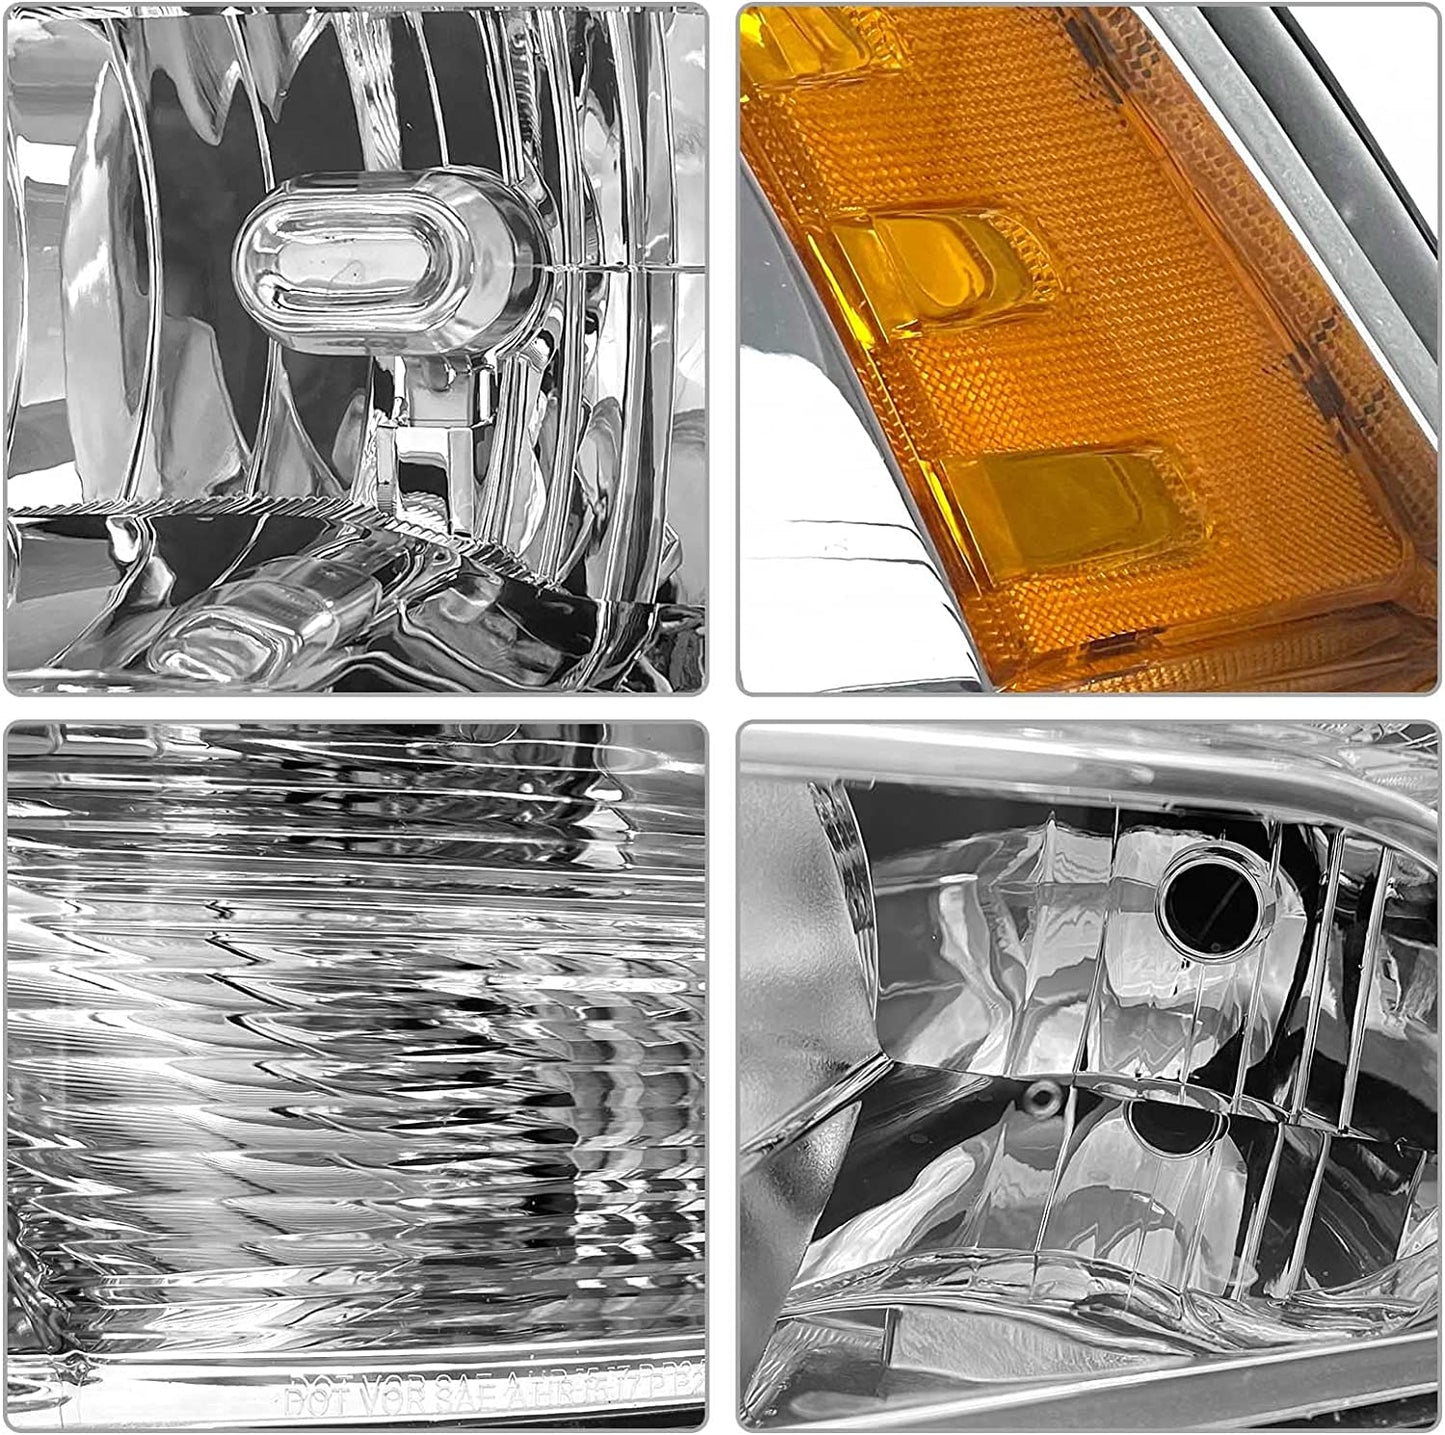 ADCARLIGHTS For 2009-2018 Dodge Ram Headlight Assembly Compatible with Ram 1500 / Ram 2500 3500 / 2010-2018 / Ram 2500 3500 / 2019-2021 Ram 1500 Classic, Chrome Housing Amber Reflector Replacement